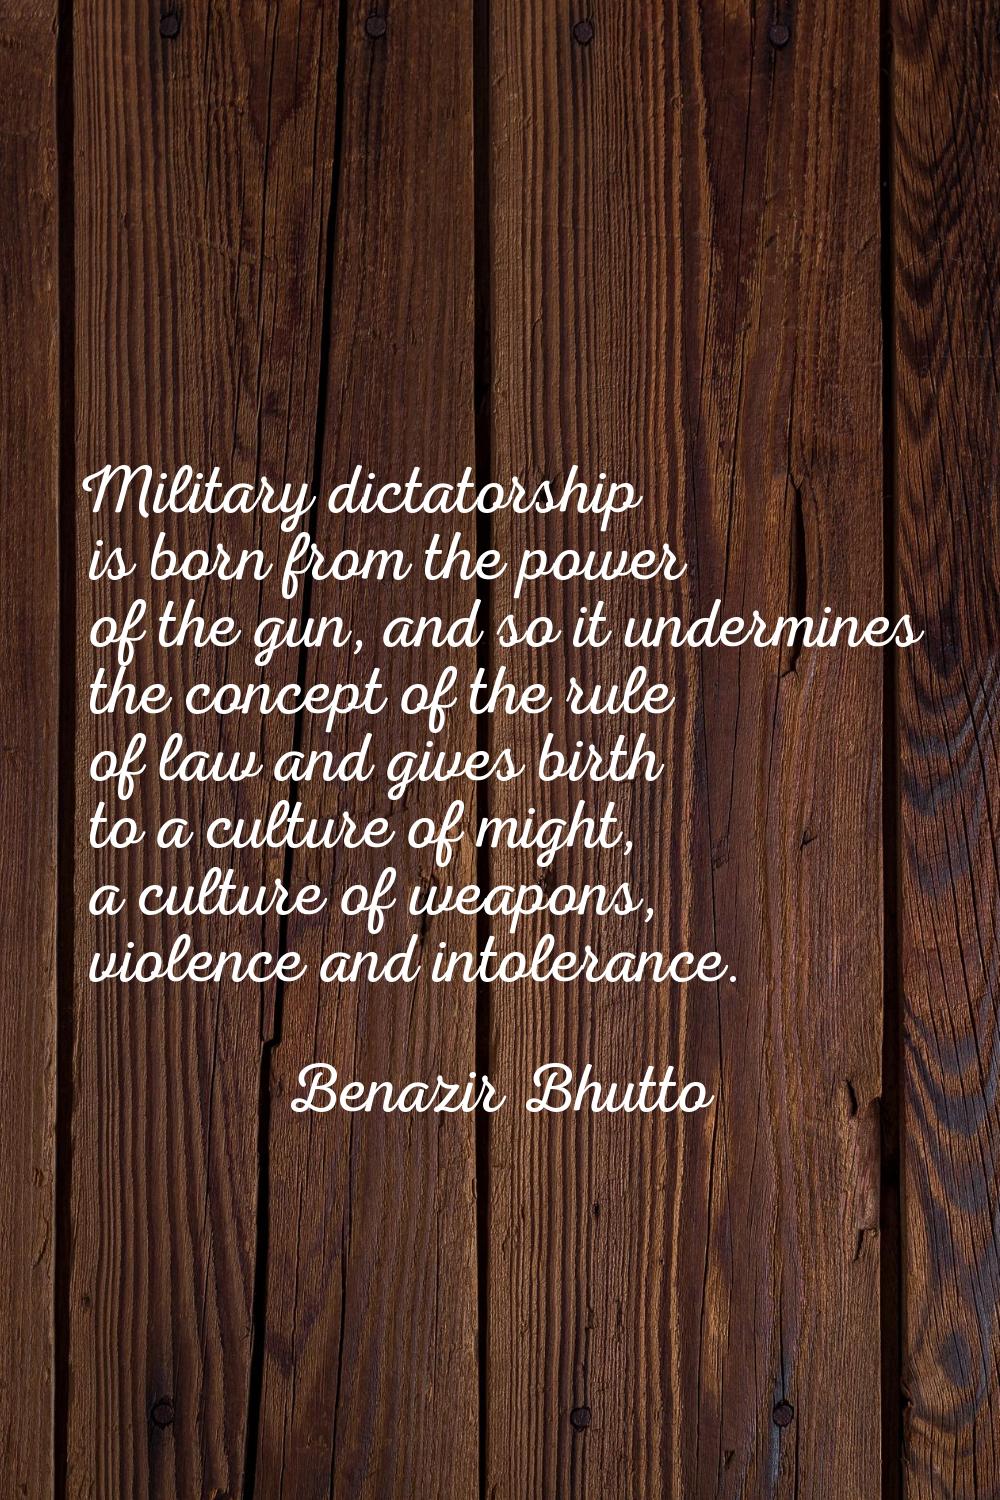 Military dictatorship is born from the power of the gun, and so it undermines the concept of the ru